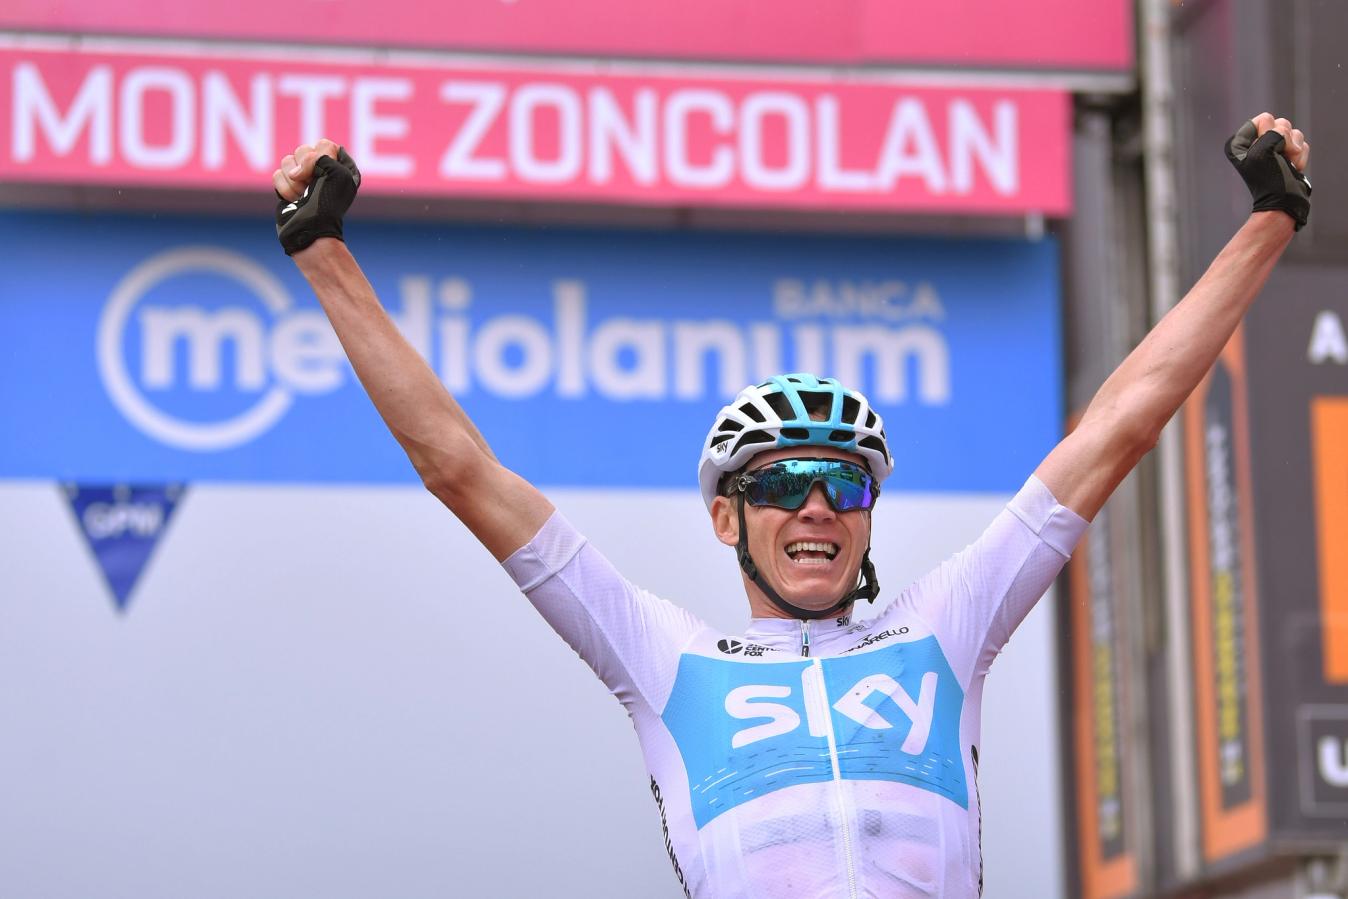 Chris Froome won on the Zoncolan in 2018